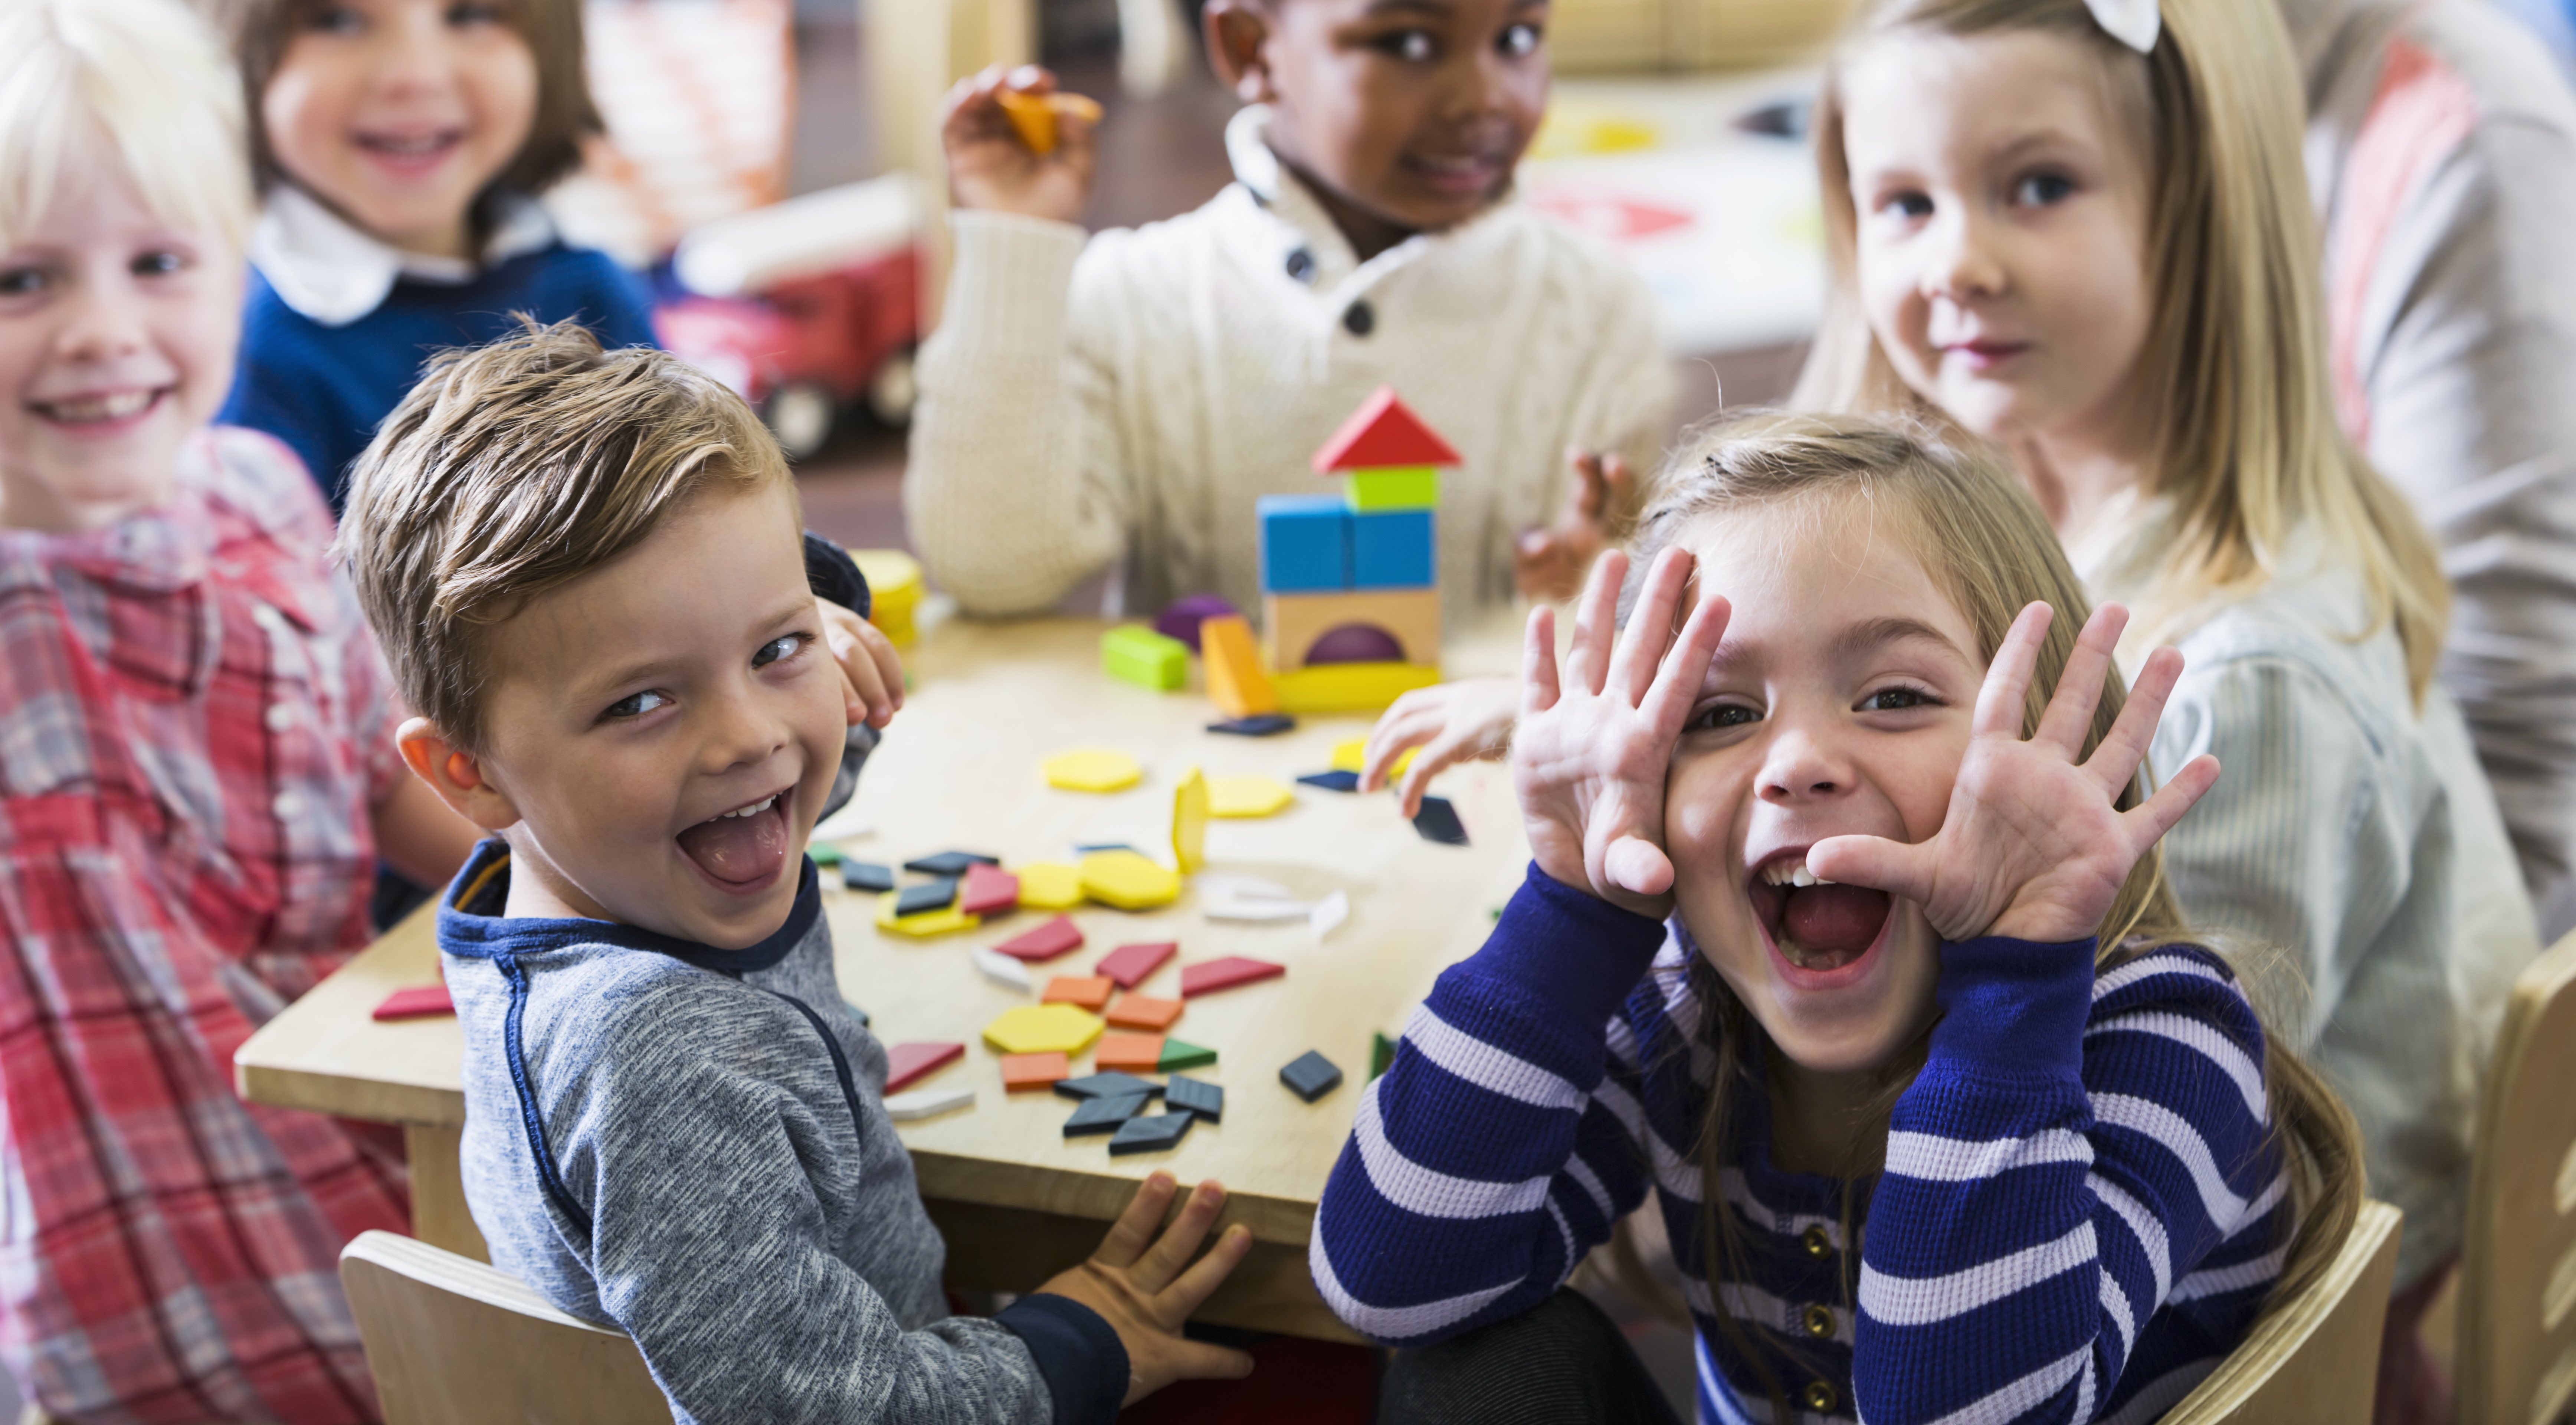 A multiracial group of preschoolers or kindergarteners having fun in the classroom. Six children are sitting around a little wooden table playing with colorful wooden block and geometric shapes. The playful little girl in the foreground is making a silly face at the camera.